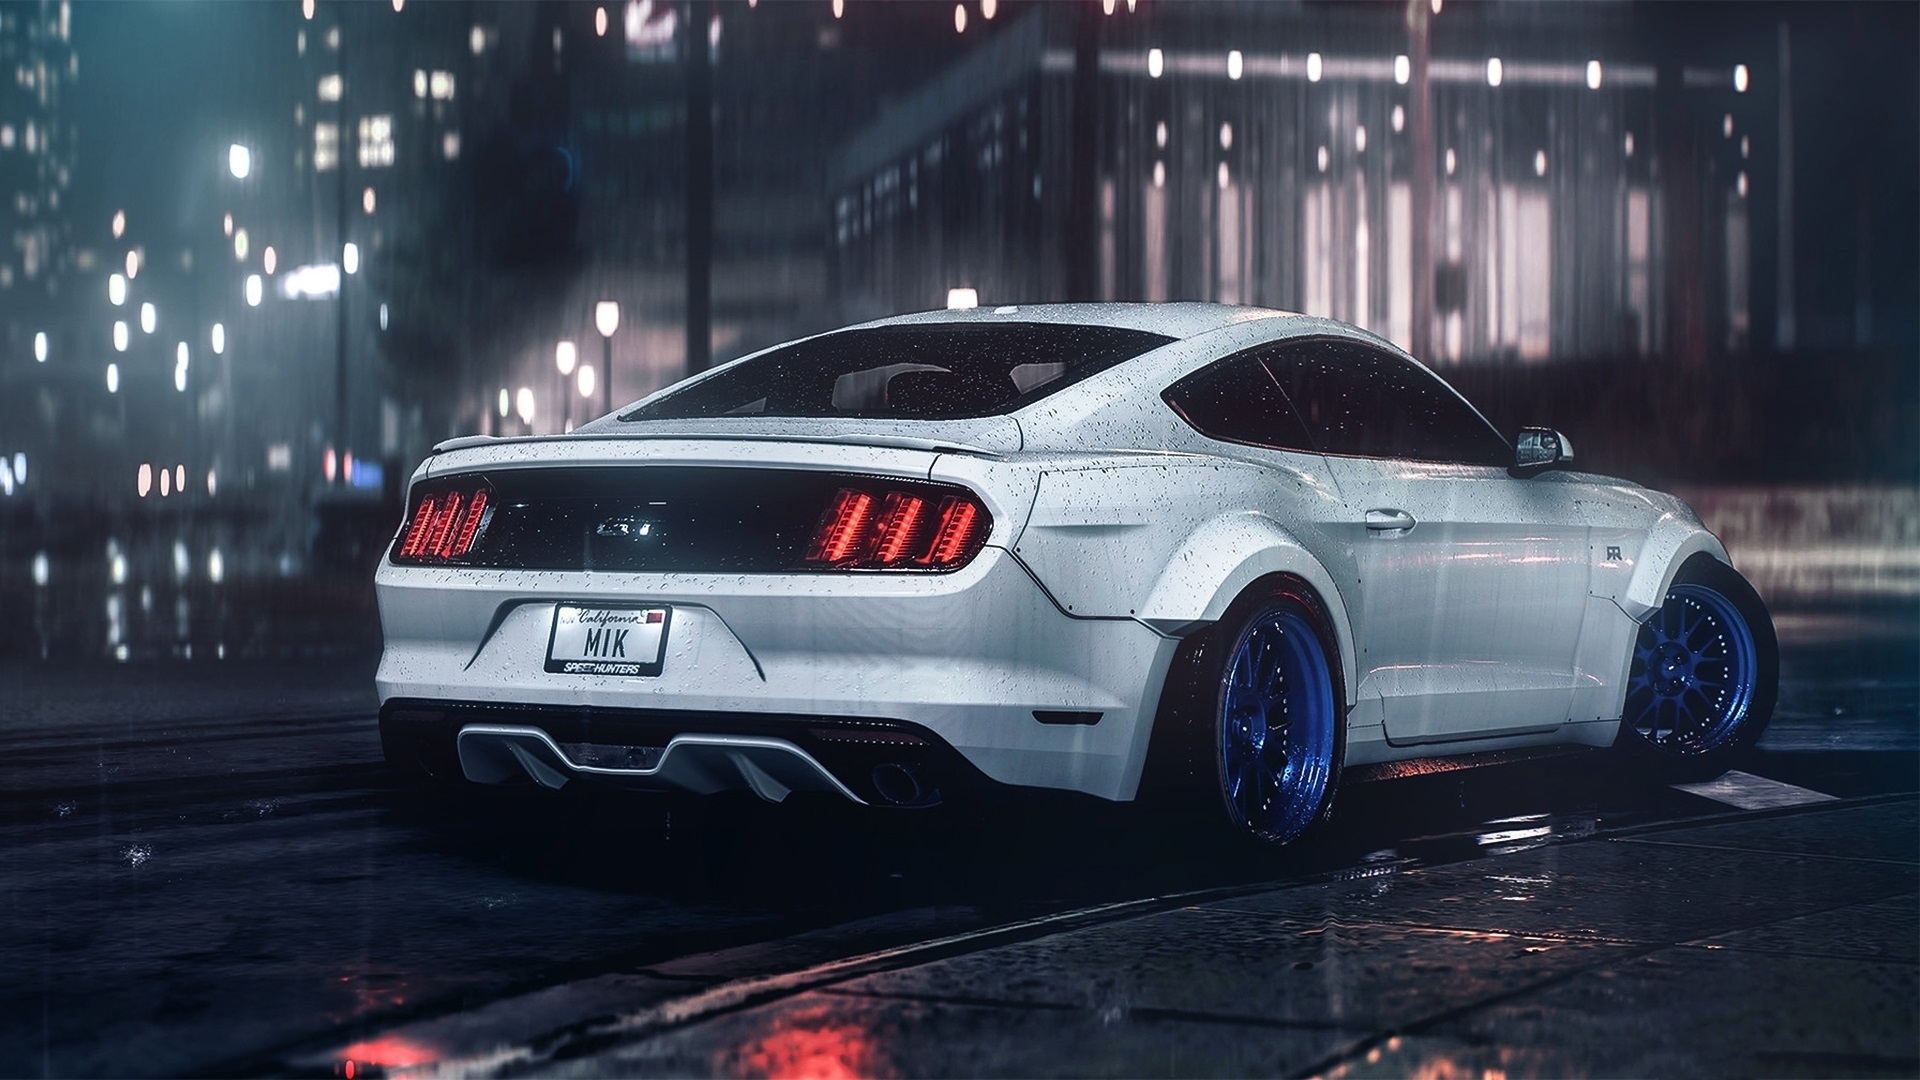 10 Most Popular Ford Mustang Gt Wallpaper FULL HD 1920×1080 For PC Background